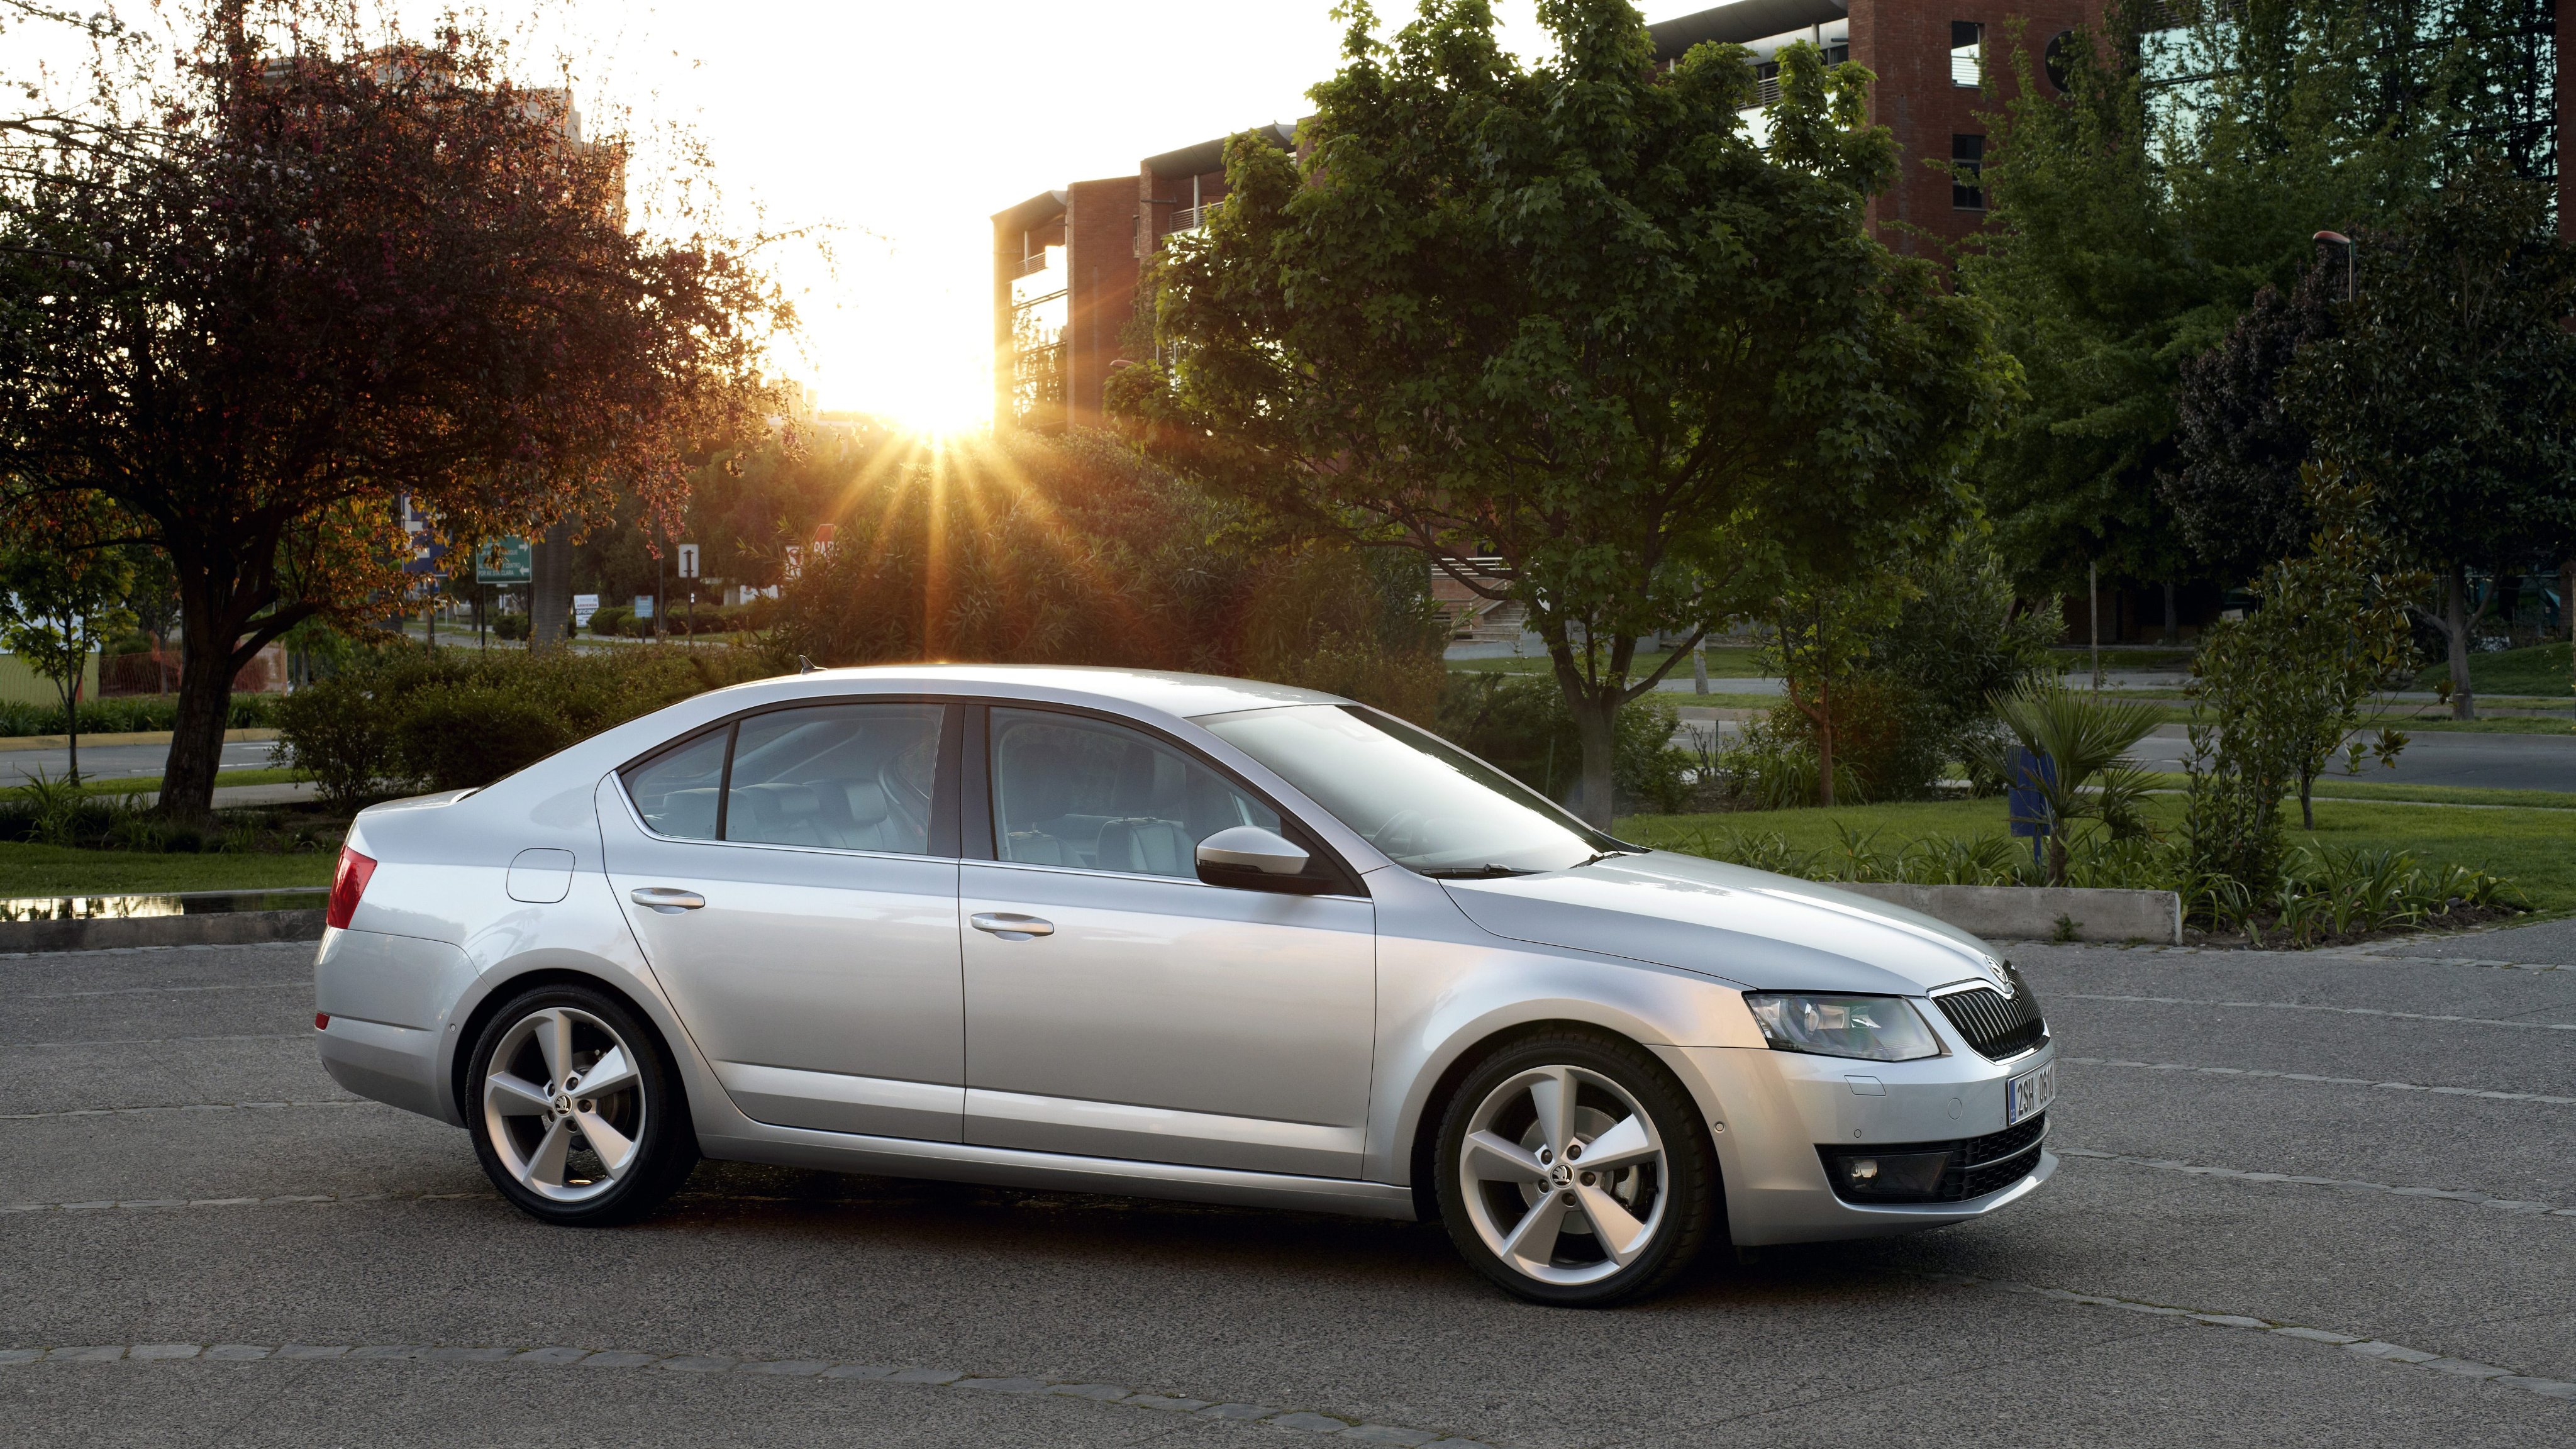 Škoda Auto News on Twitter: "The 3rd-generation #SkodaOctavia (2012 to 2020) consumed up to 17% less fuel than the previous thanks to new engines. After the 2016 facelift, the equipment line-up